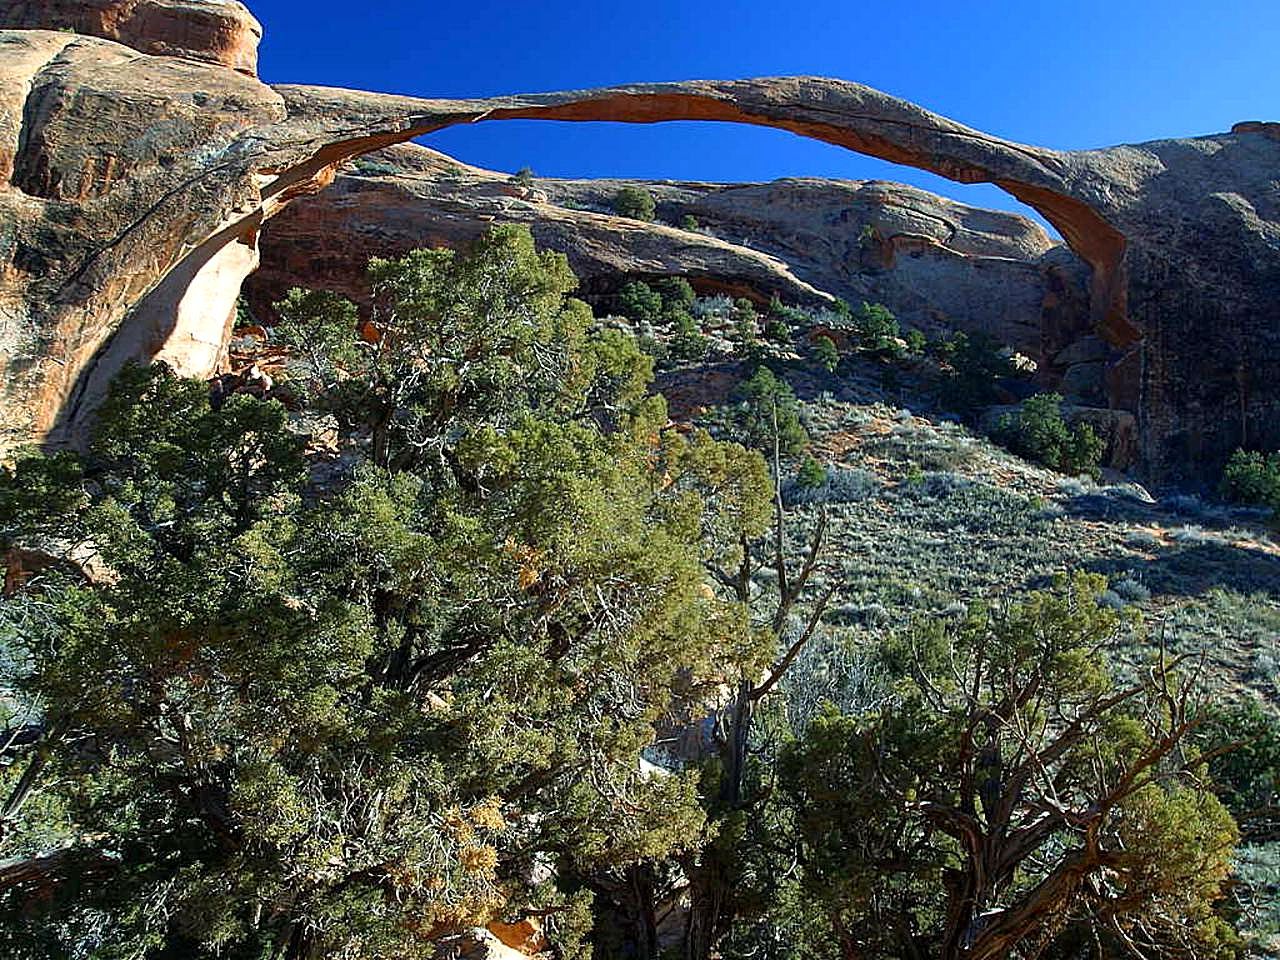 landscape arch at arches national park with photo